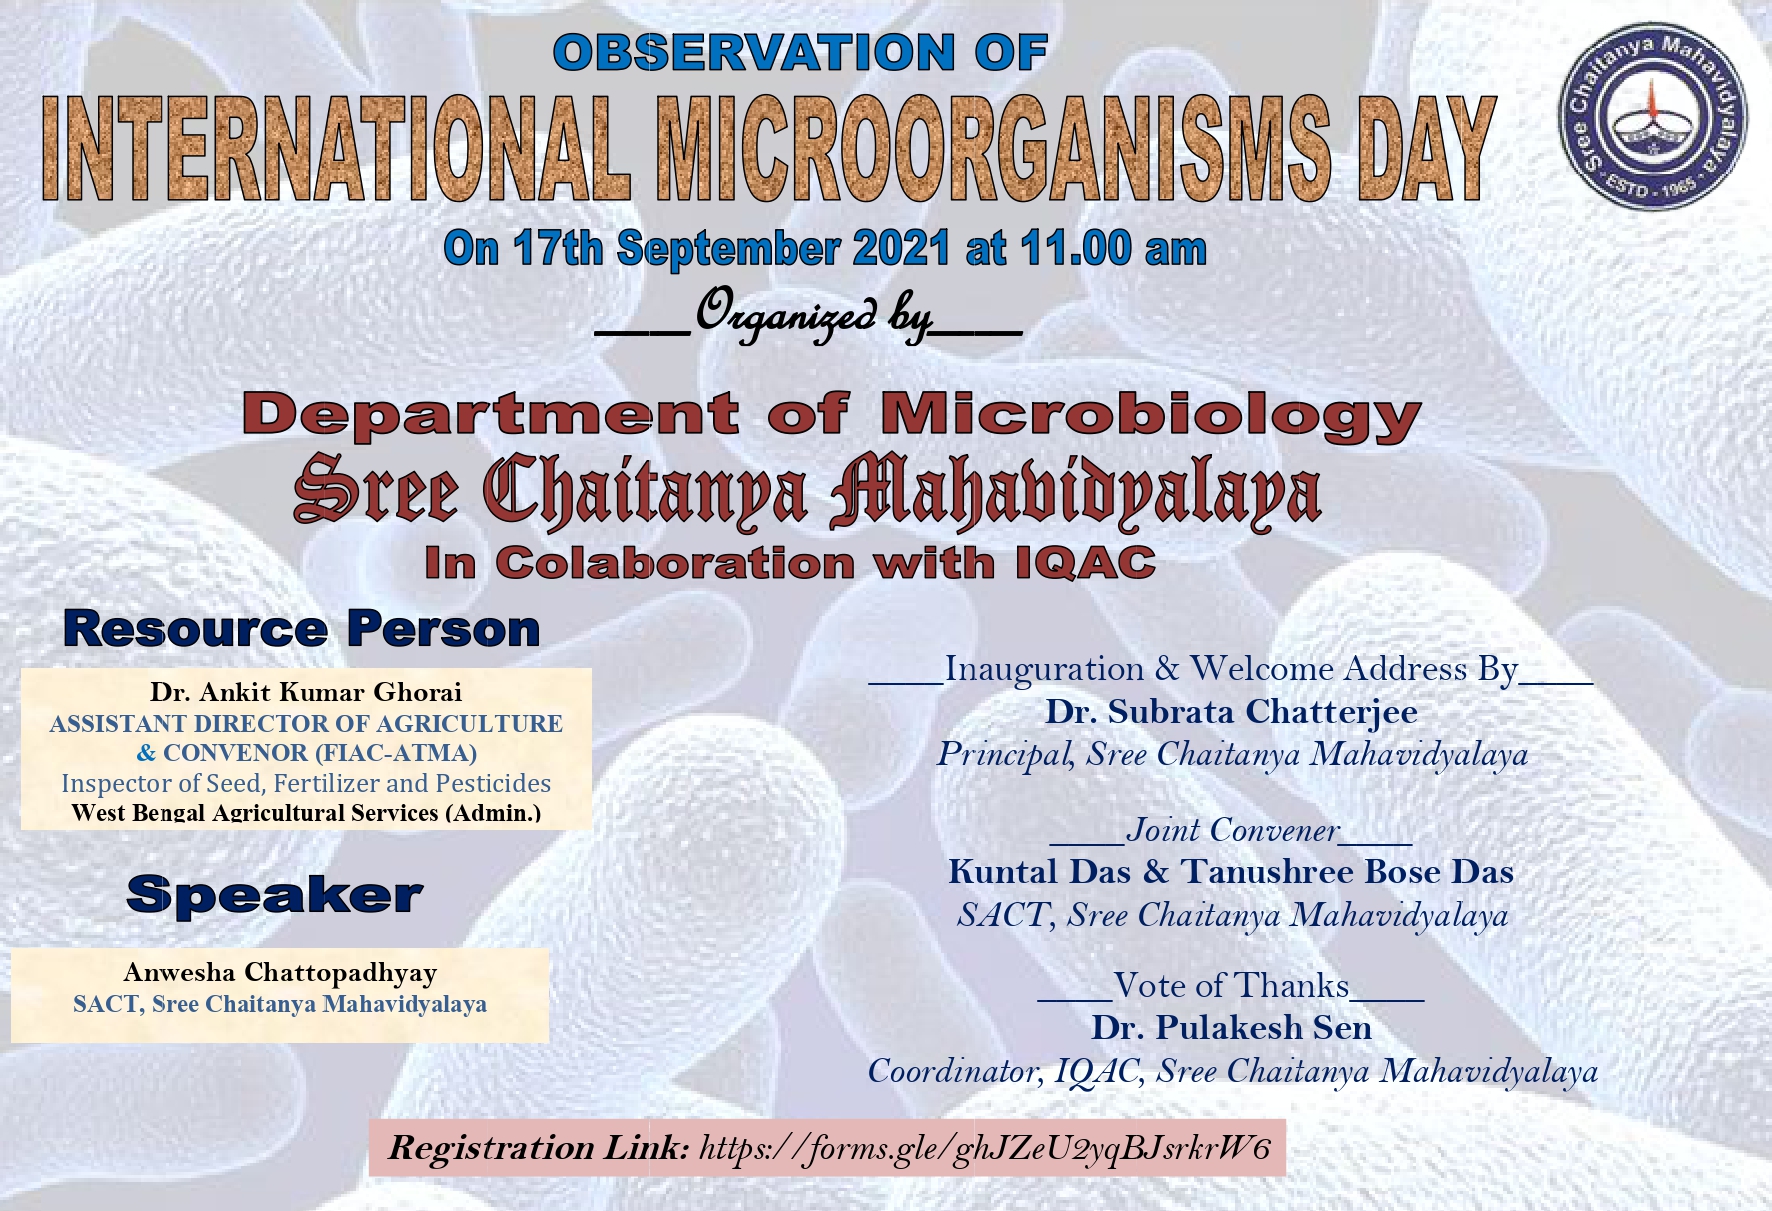 Observation of International Microorganisms Day, 17-09-2021